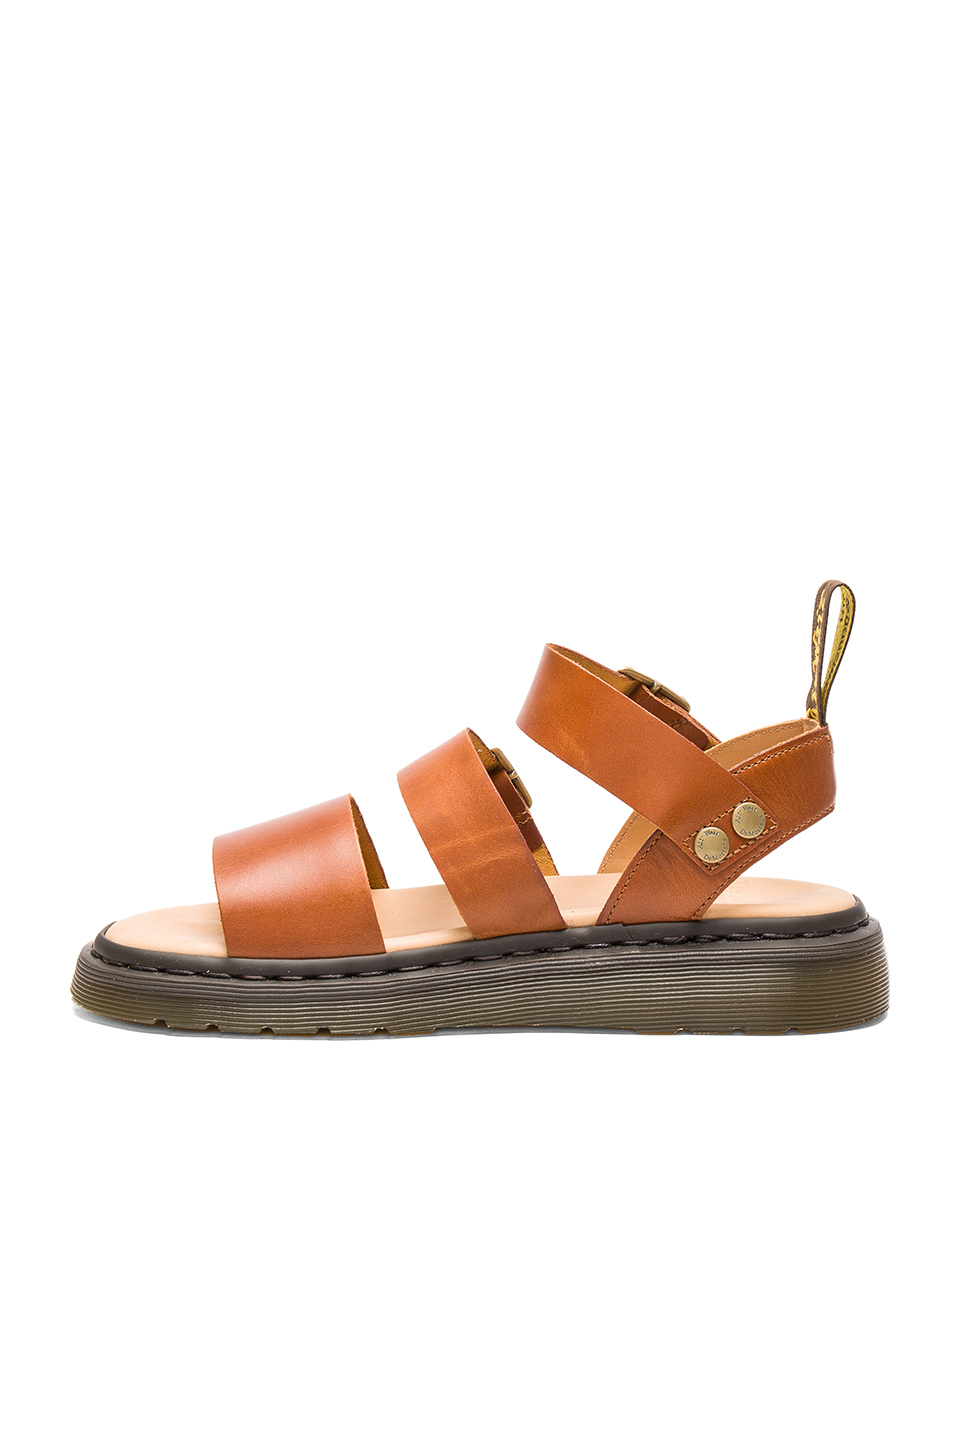 Dr. Martens Leather Gryphon Sandals in Oak (Brown) | Lyst